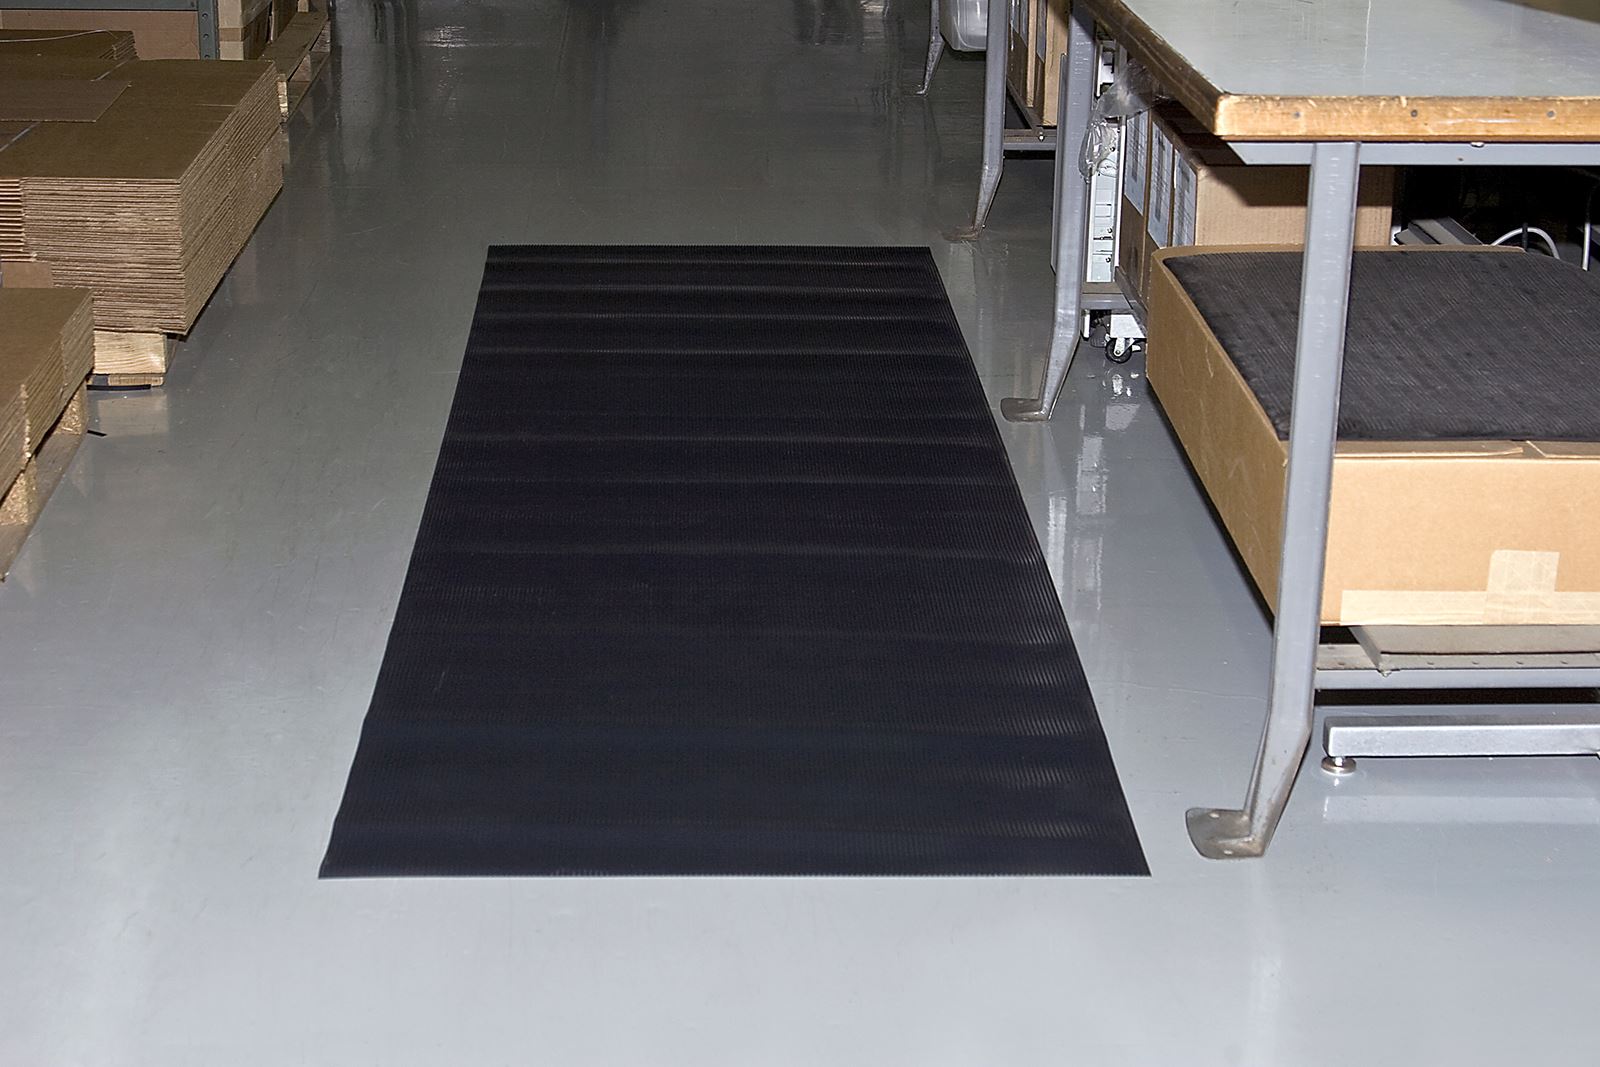 Durable 1/8 Thick Corrugated Rubber Runner Mat Roll, 2' x 75' , Black